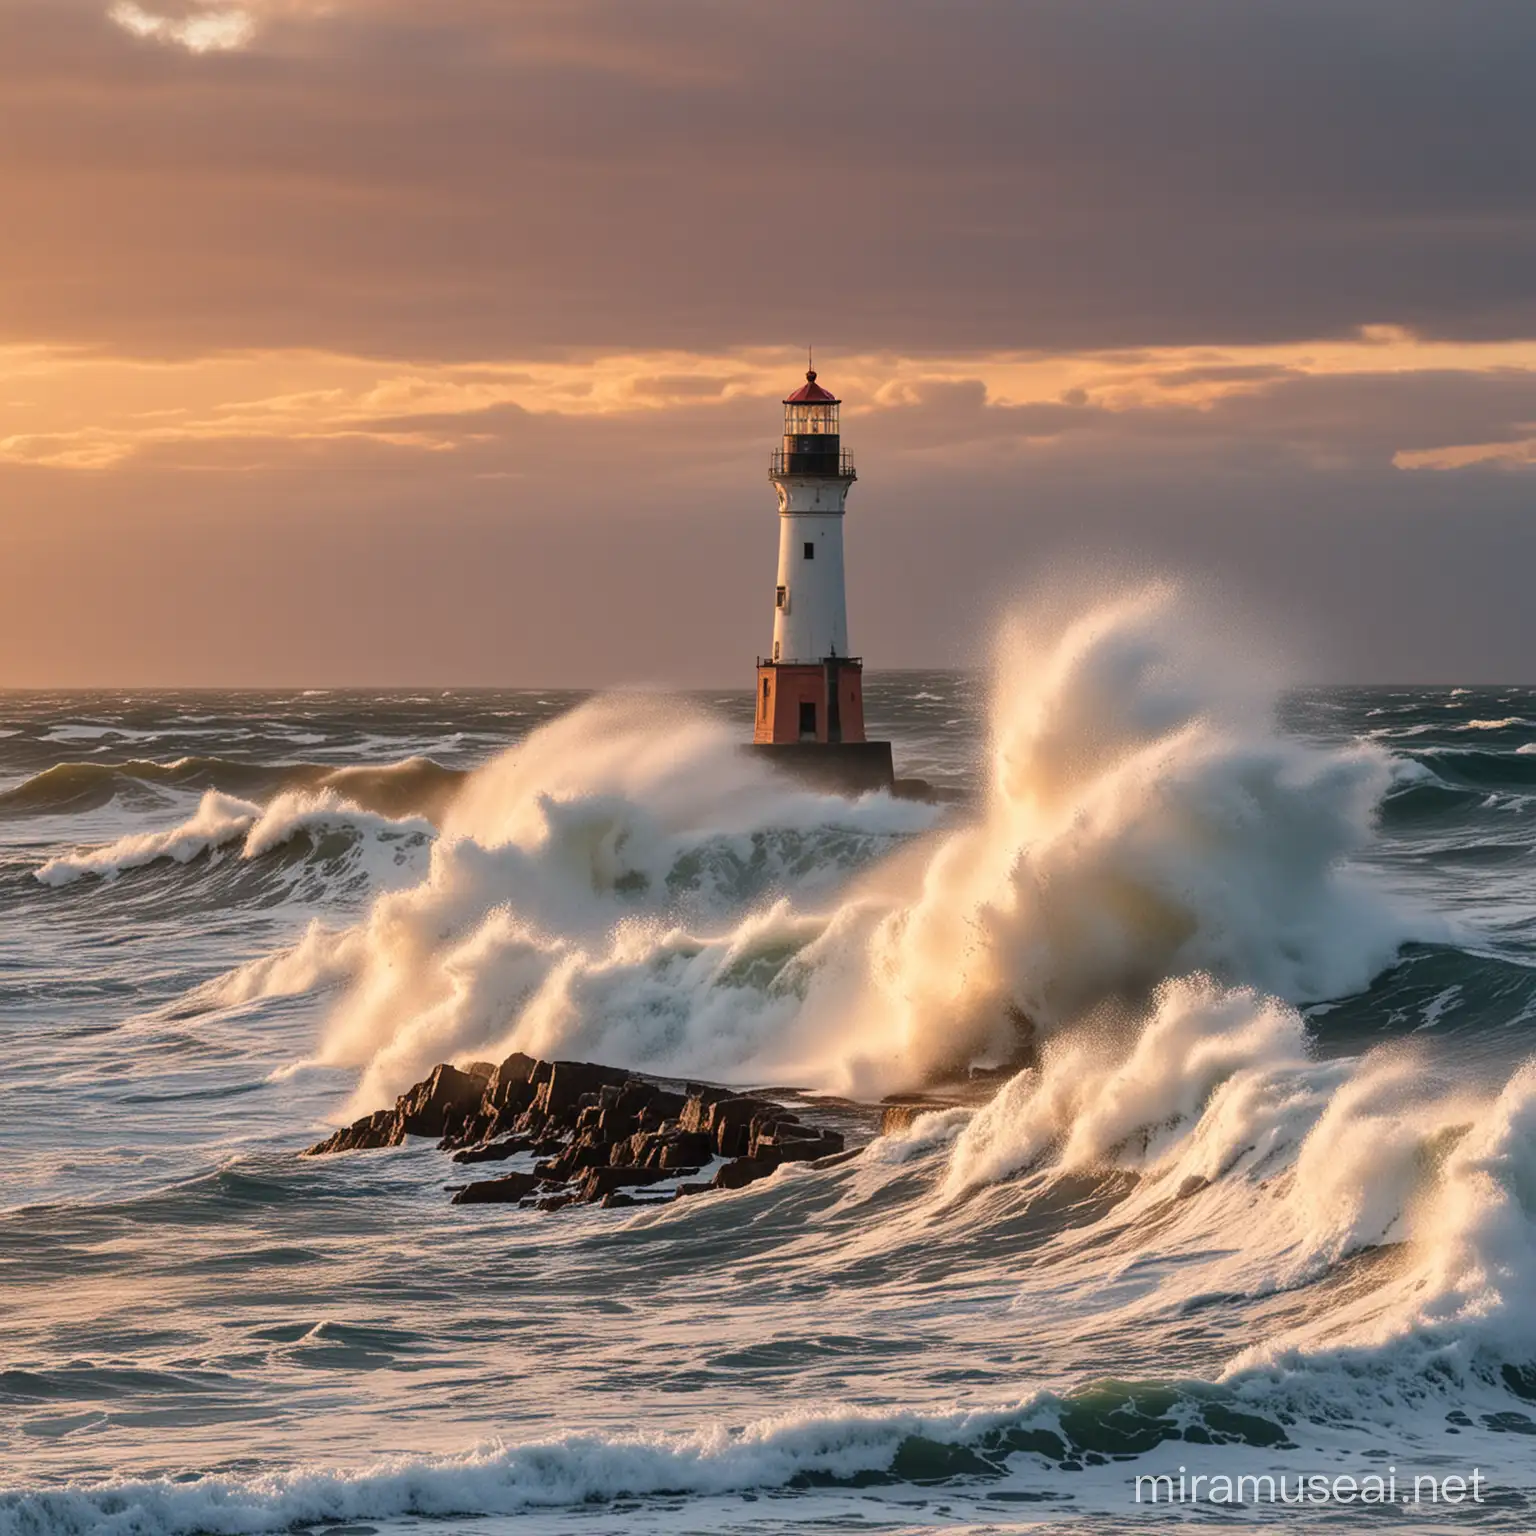 Dramatic Winter Sunrise Seascape with Towering Waves and Lighthouse